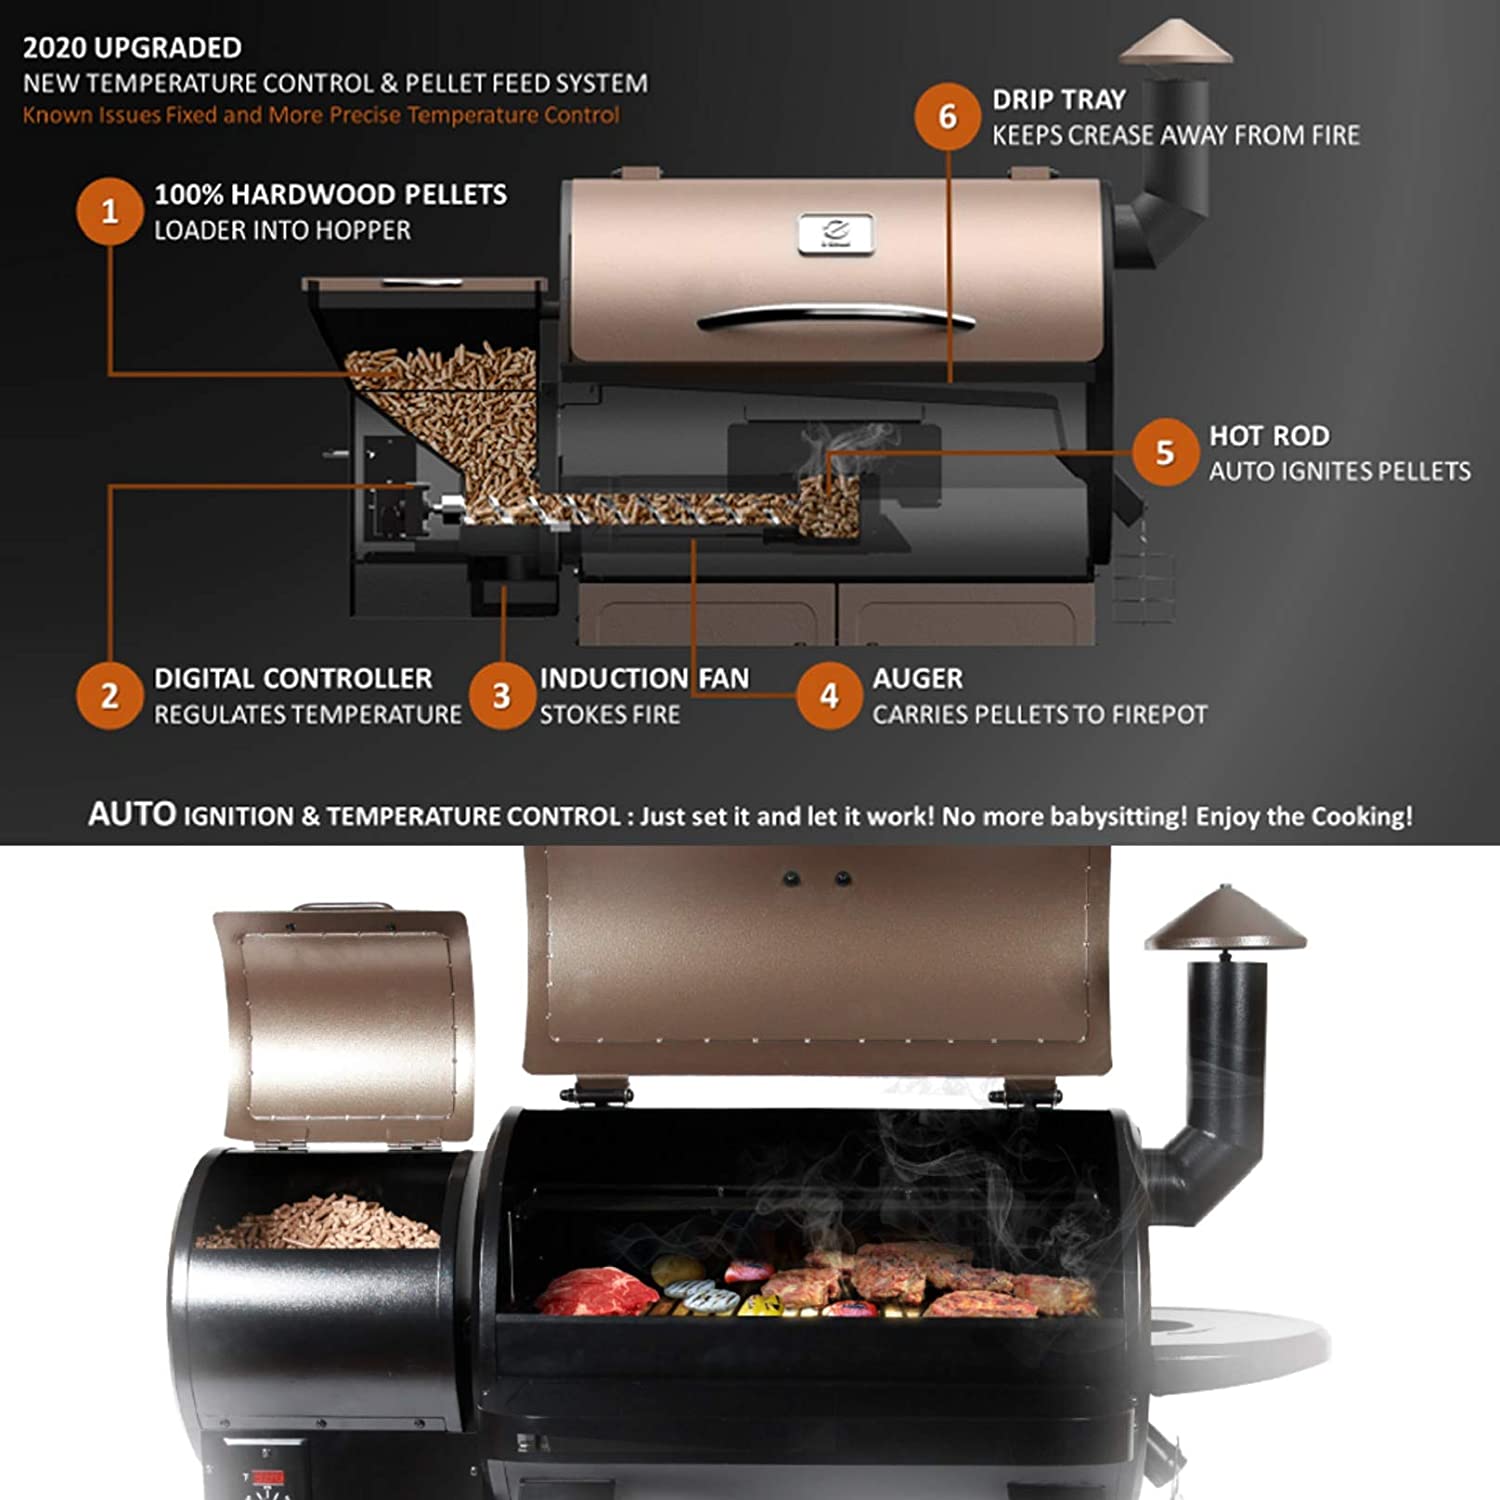 Z GRILLS 450A Smart Wood Pellet Fired Grill 6 in 1 Outdoor BBQ Smoker 450 SQ inches Cooking Space Barbecue Grilling Bronze - image 2 of 10